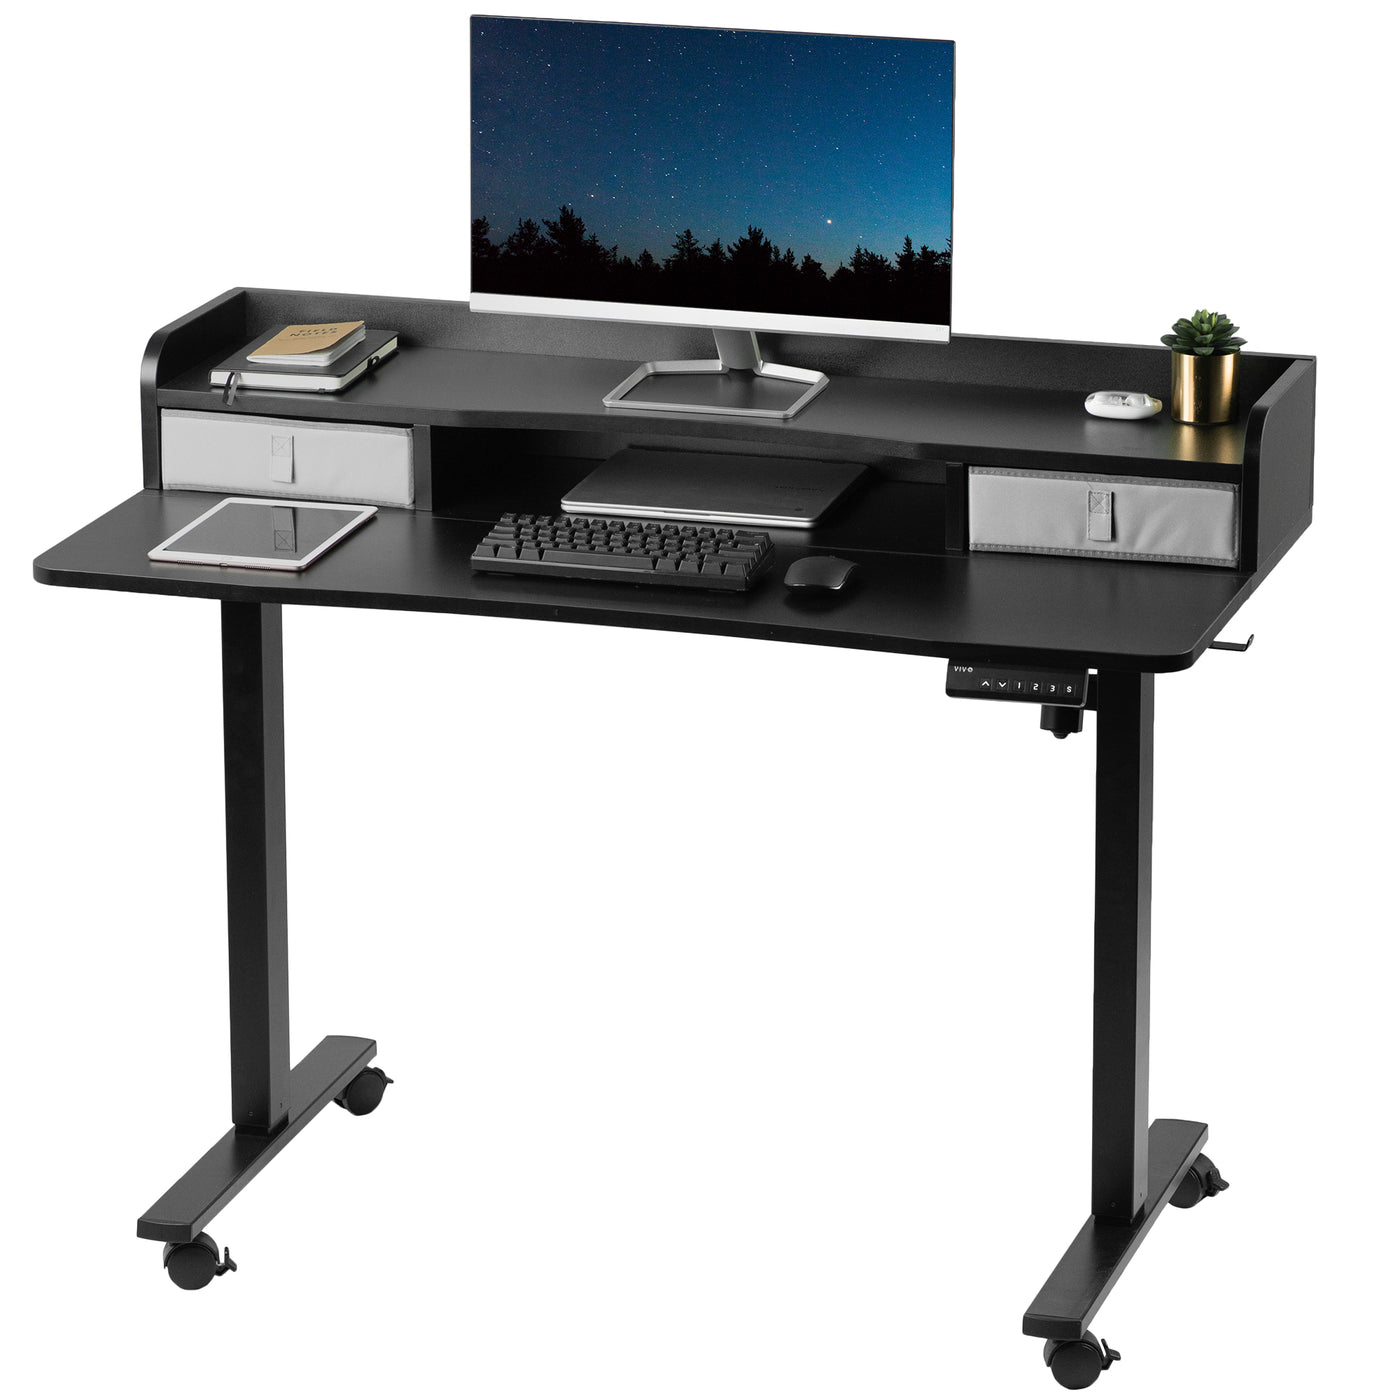 Dual-tier height adjustable electric desk with built-in storage and drawers.